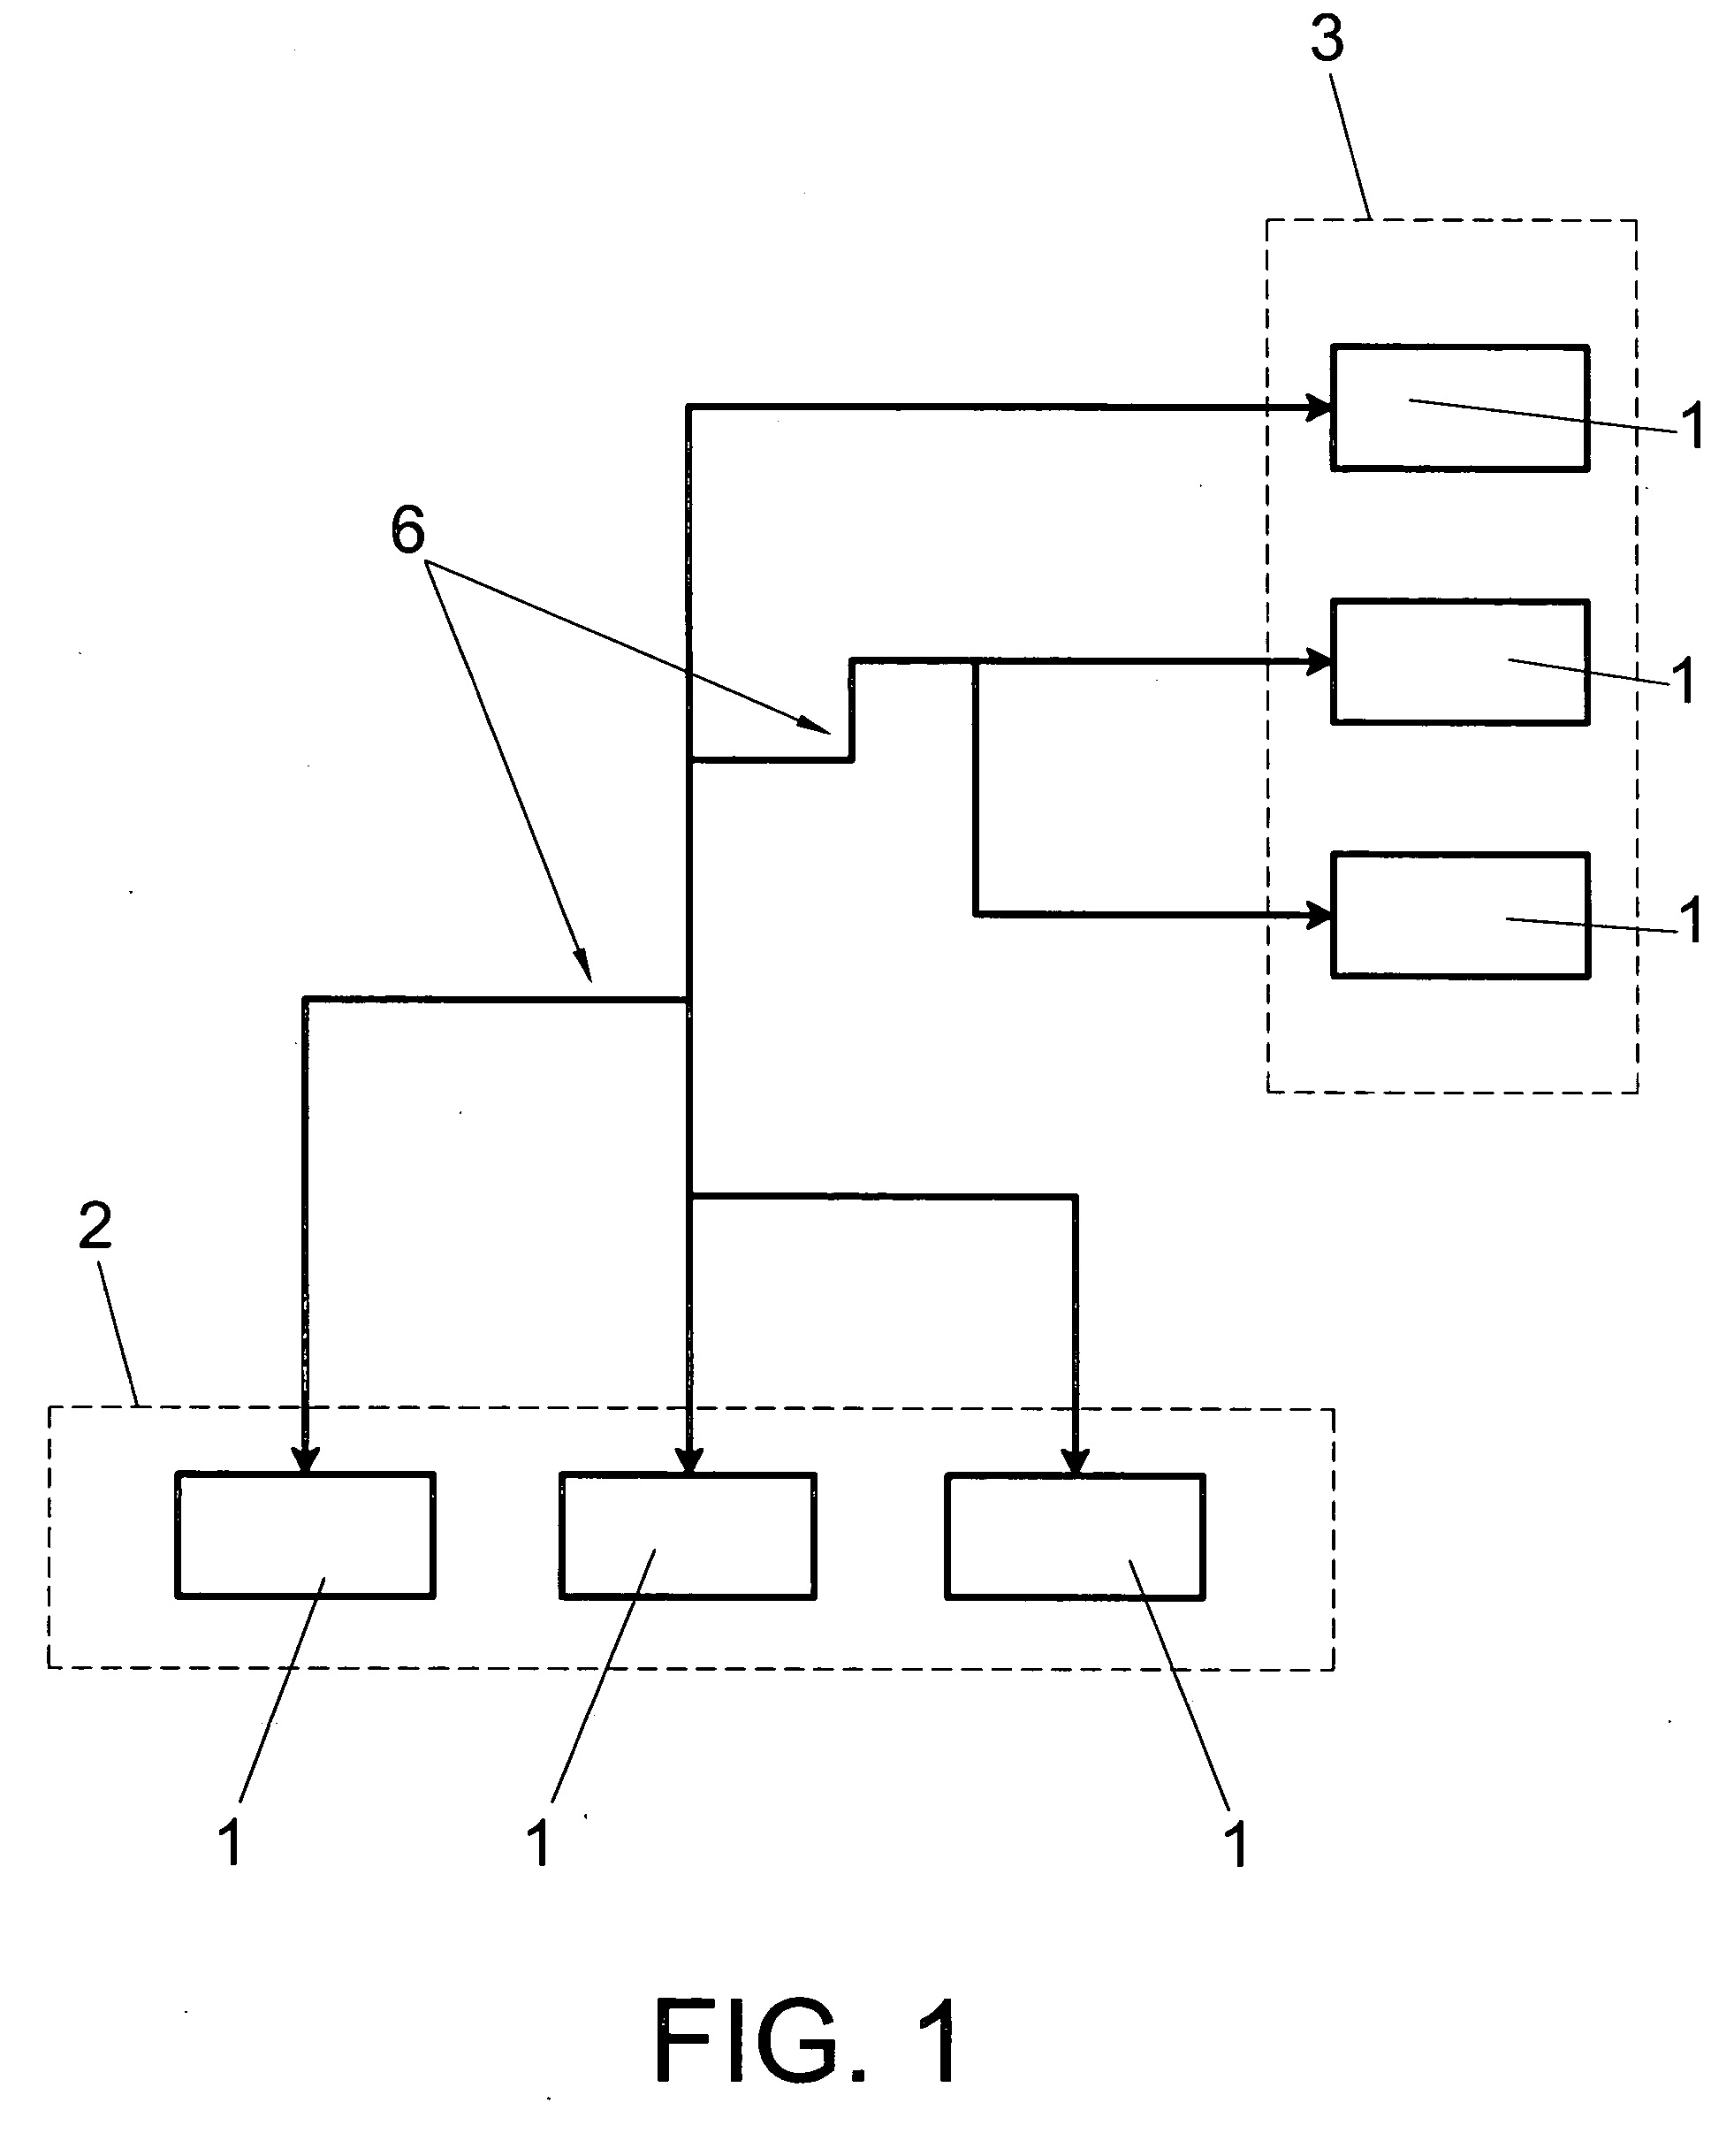 Process for the transmission of data by a multi-user, point to multi-point digital data transmission system